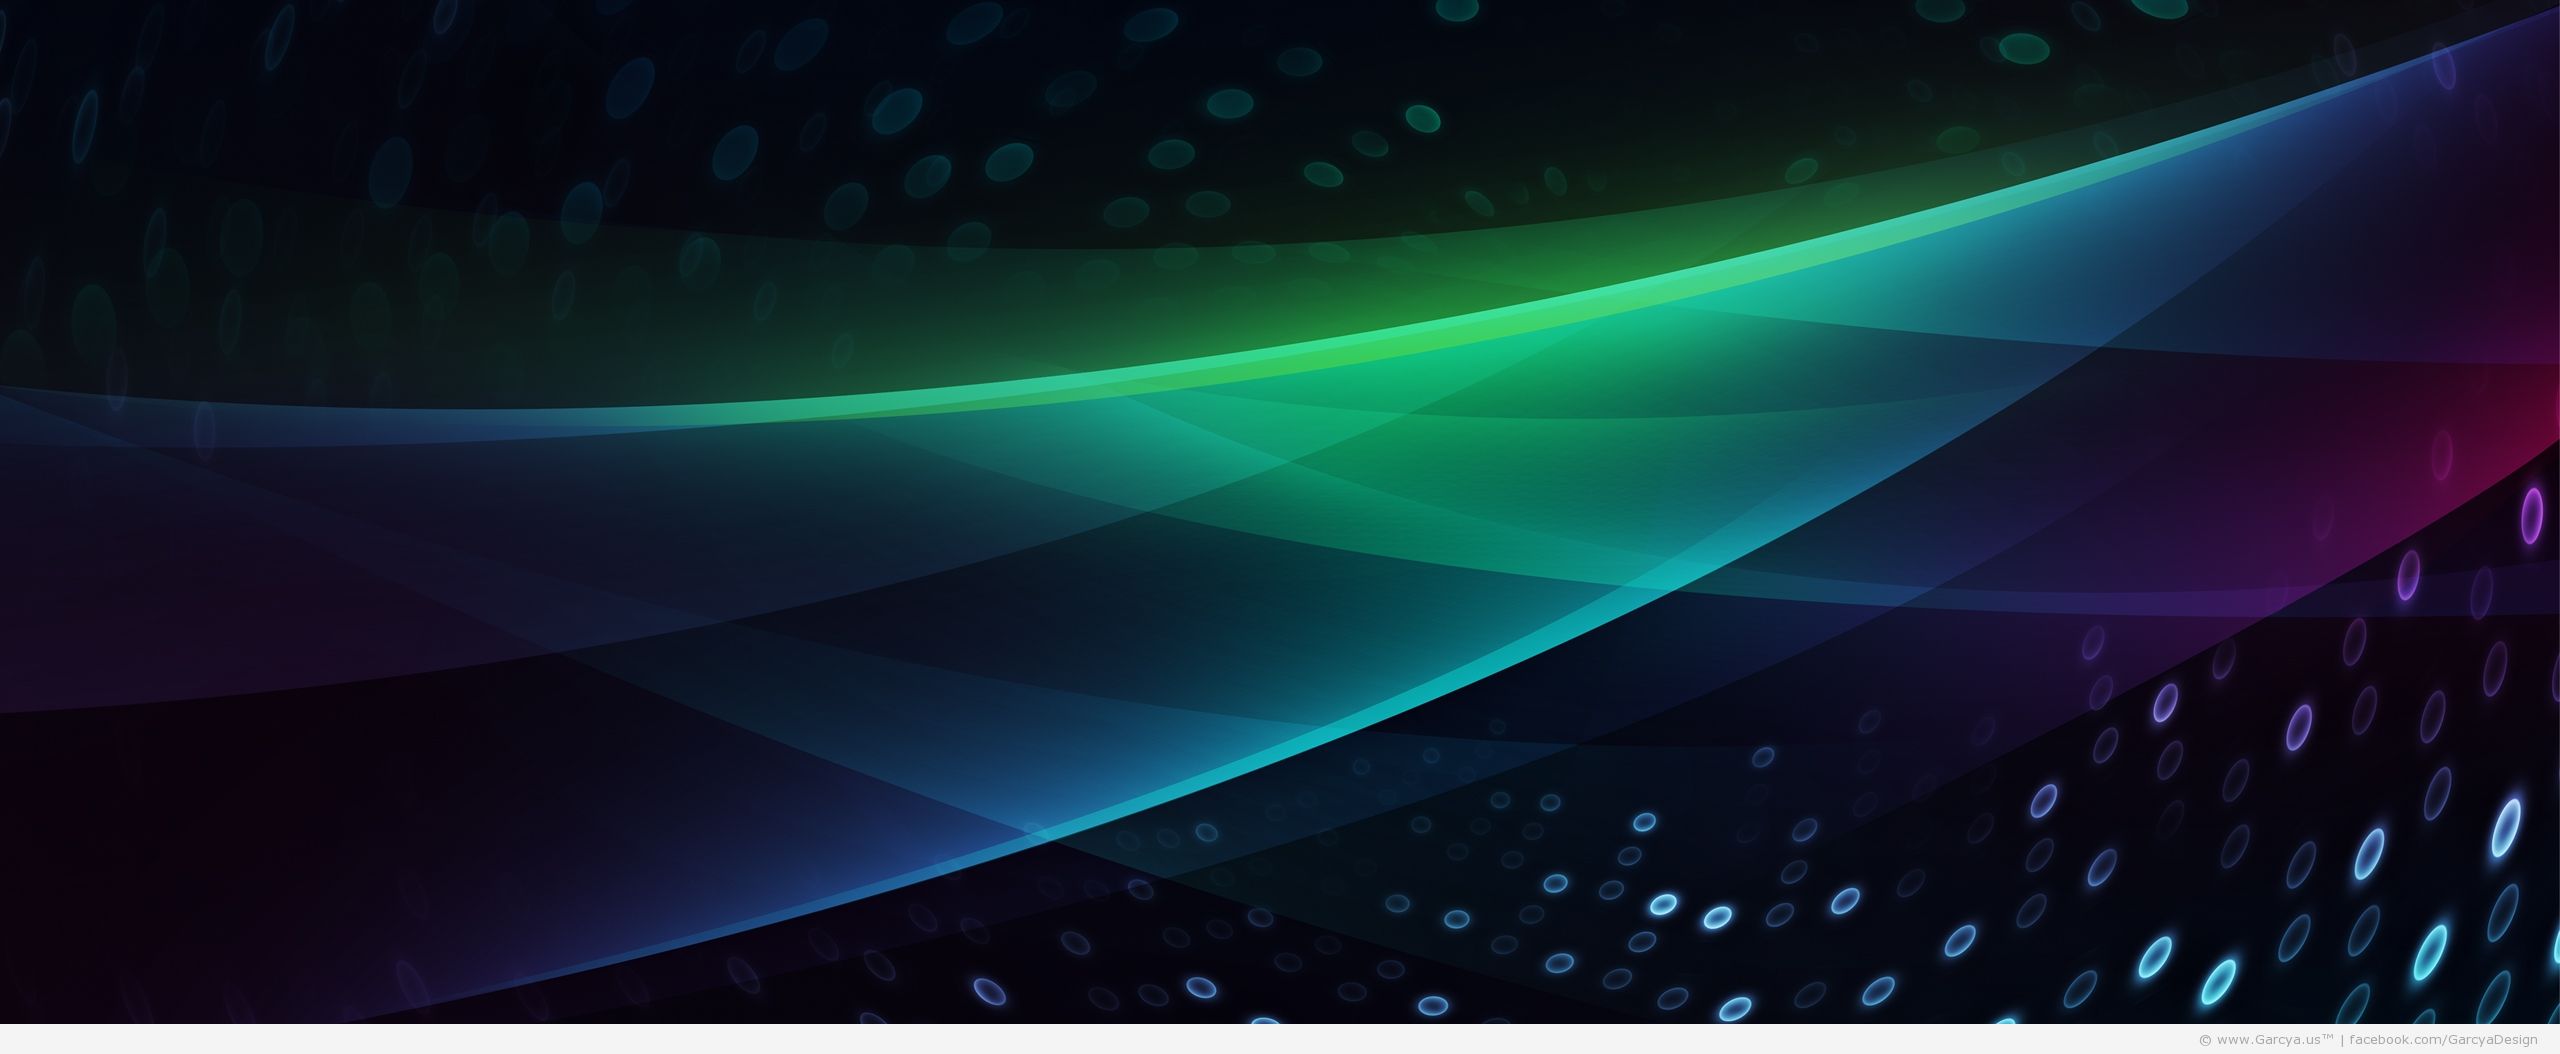 Awesome Dual Monitor Wallpaper Web Design